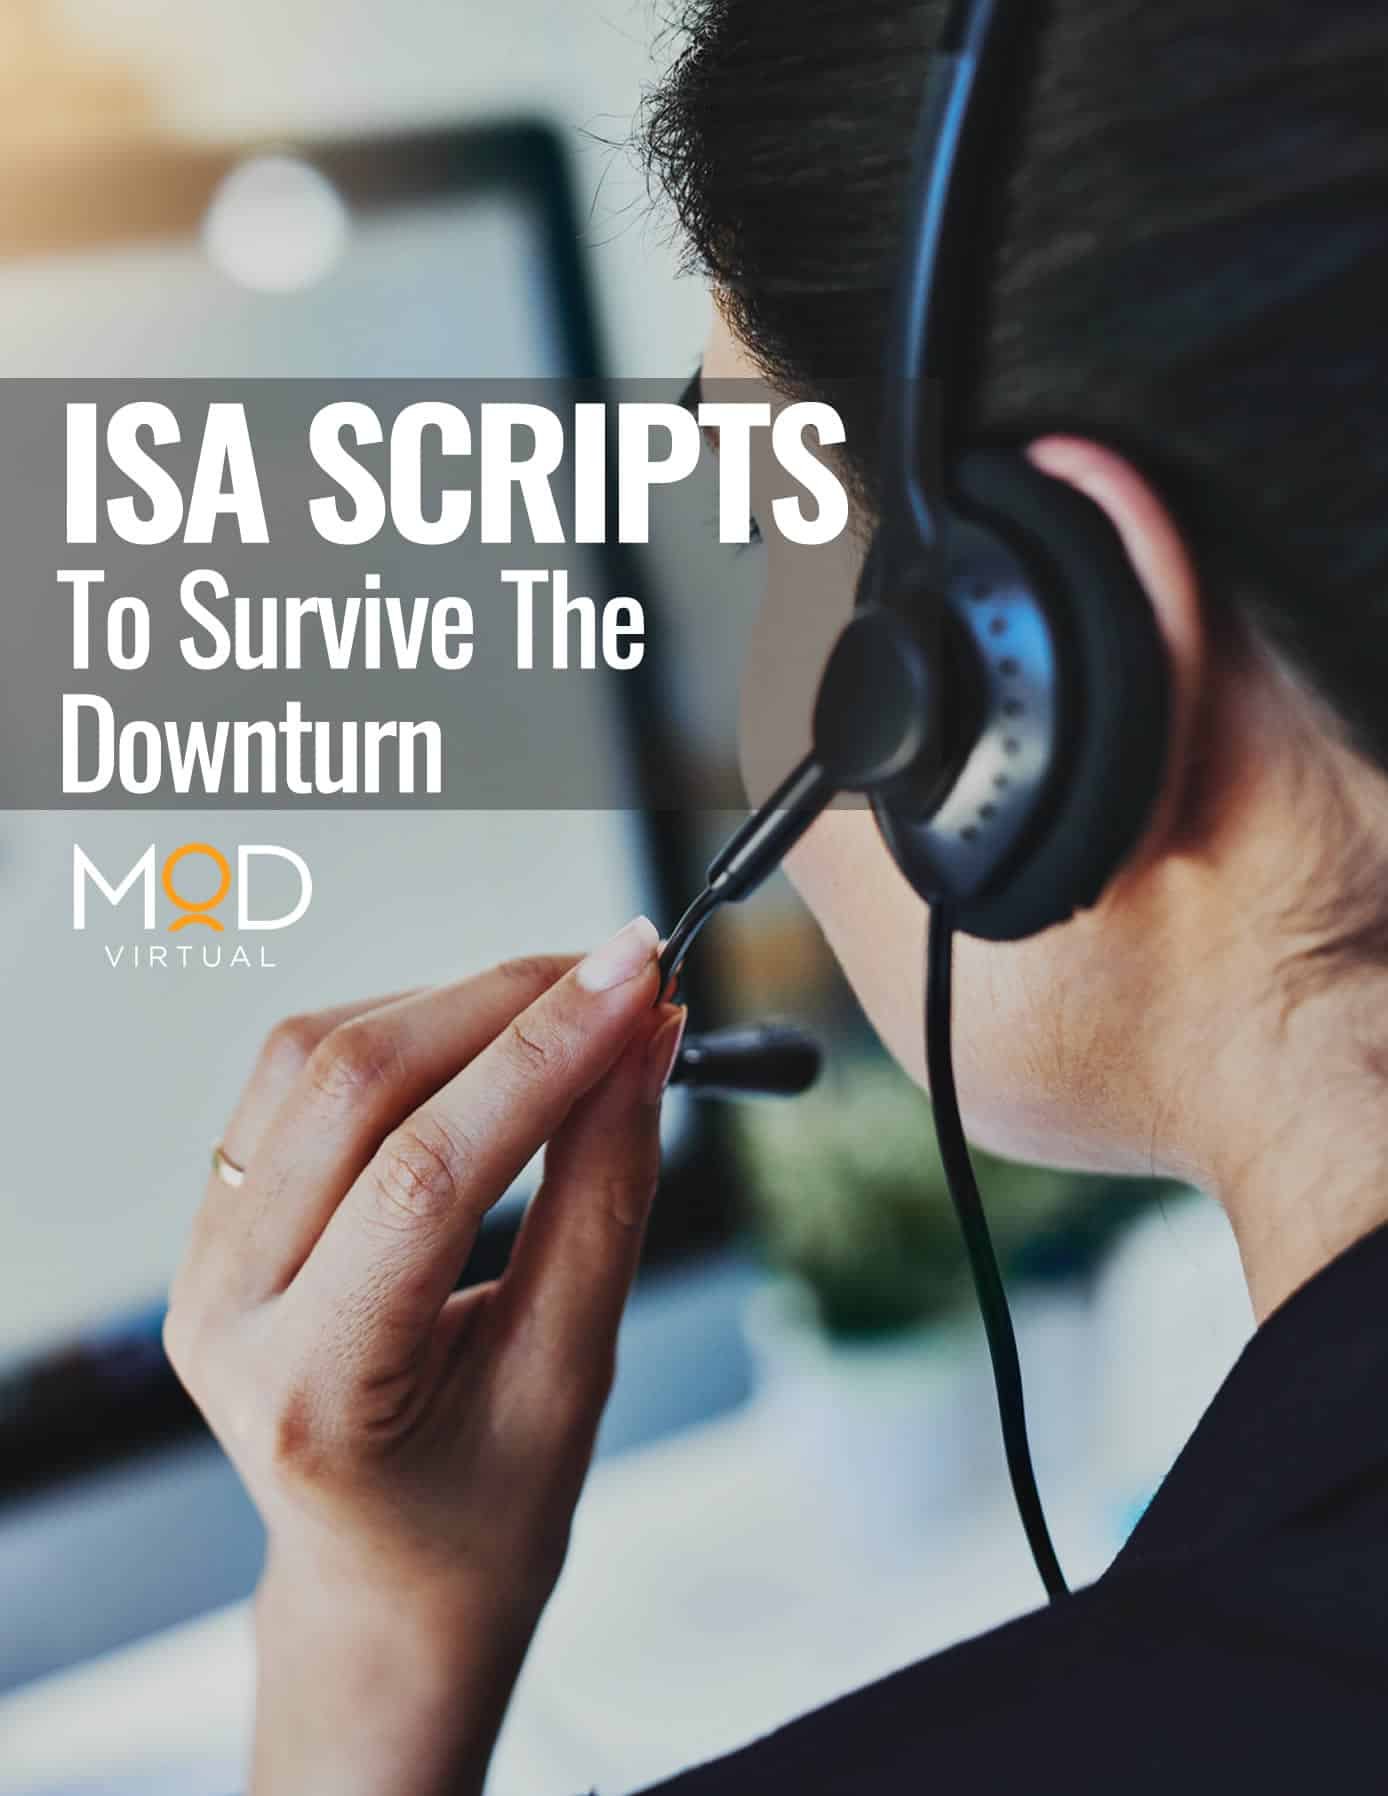 myoutdesk virtual assisant ISA Scripts to survive the downturn